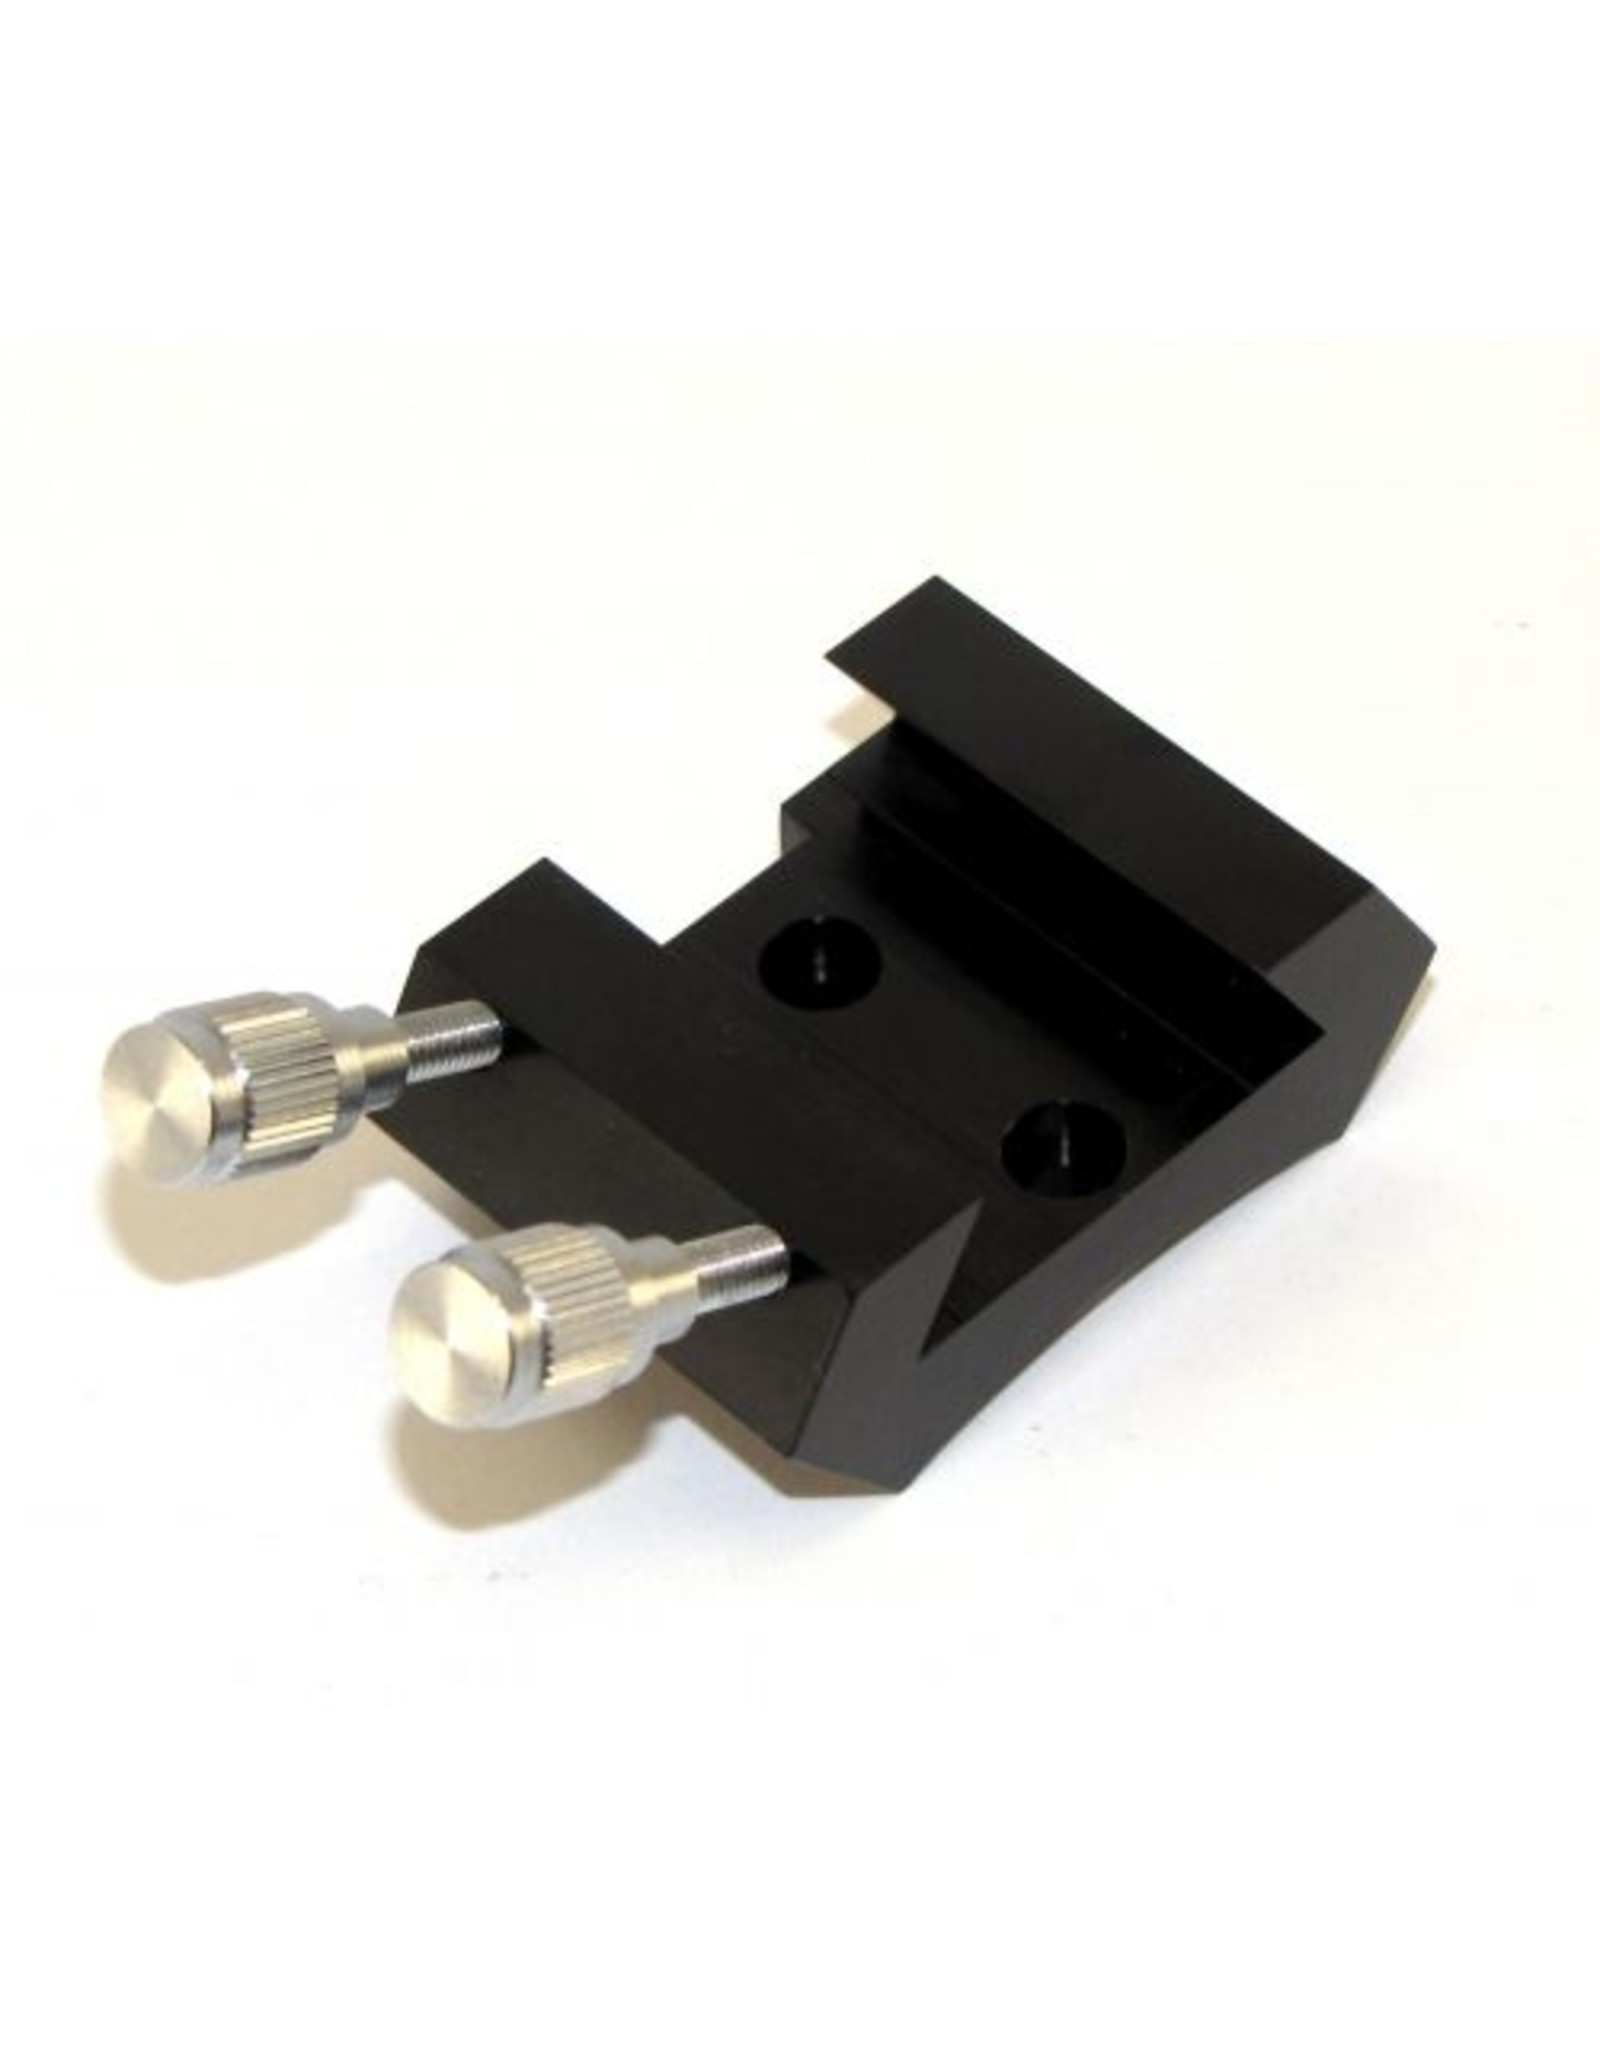 Feathertouch Feathertouch FSB-CH--Bracket-Mounting bracket for FSB-CH4055 Finderscope